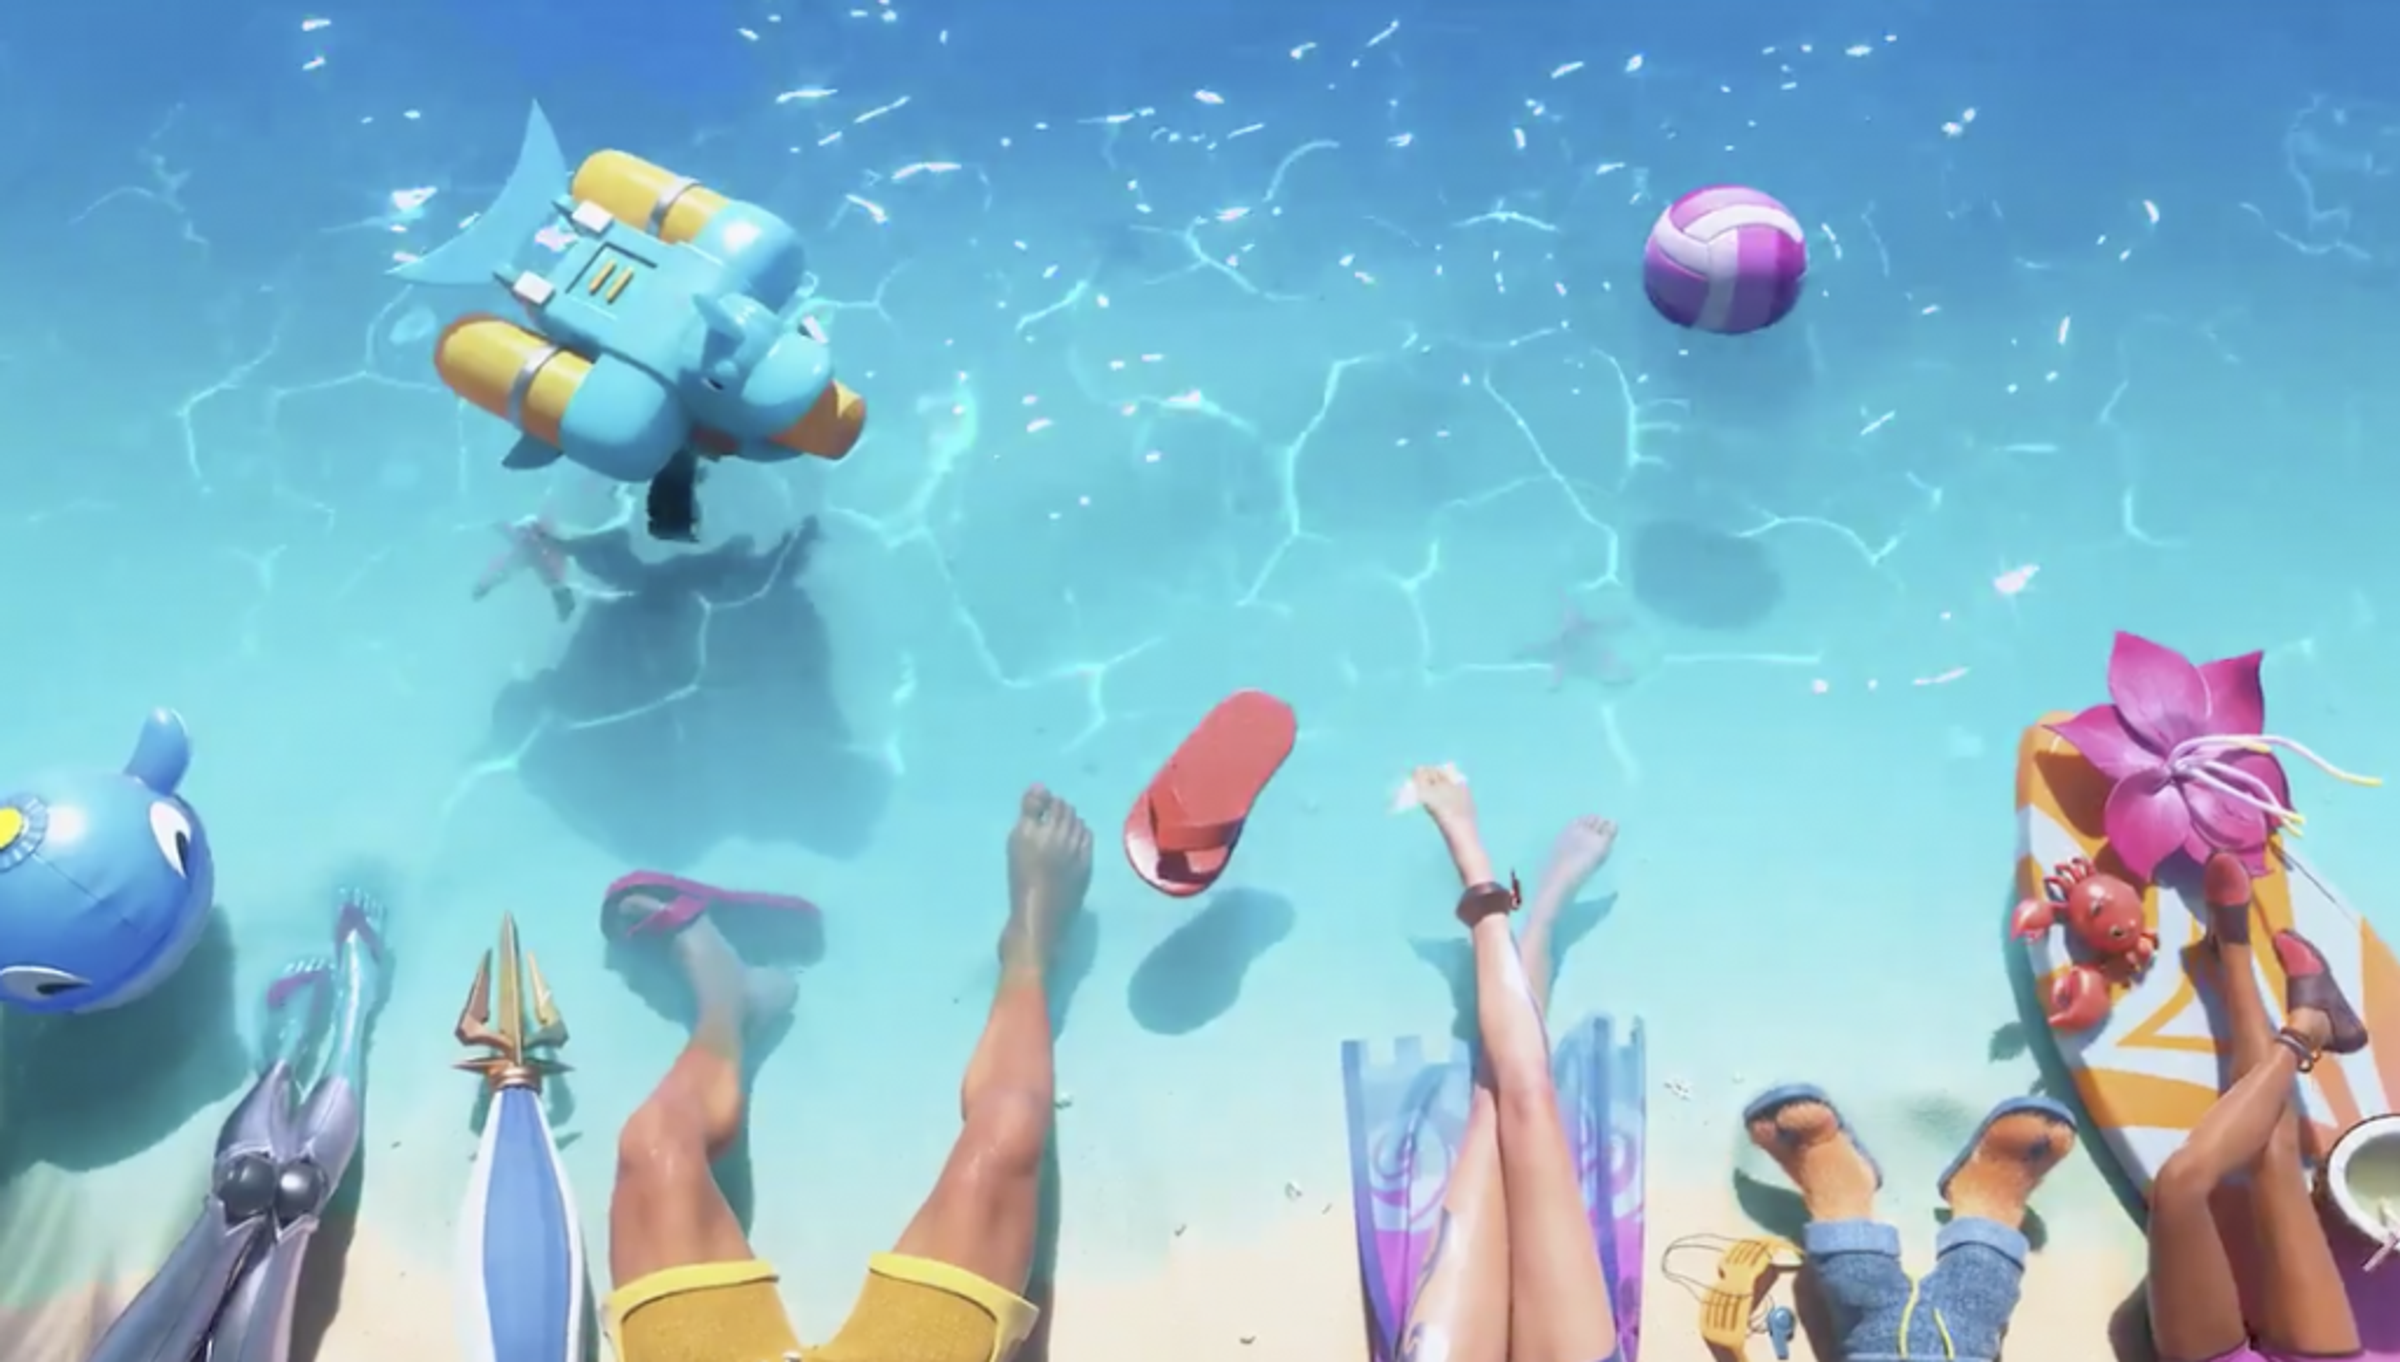 Teaser Hints At More Pool Party Skins For League Of Legends GINX TV